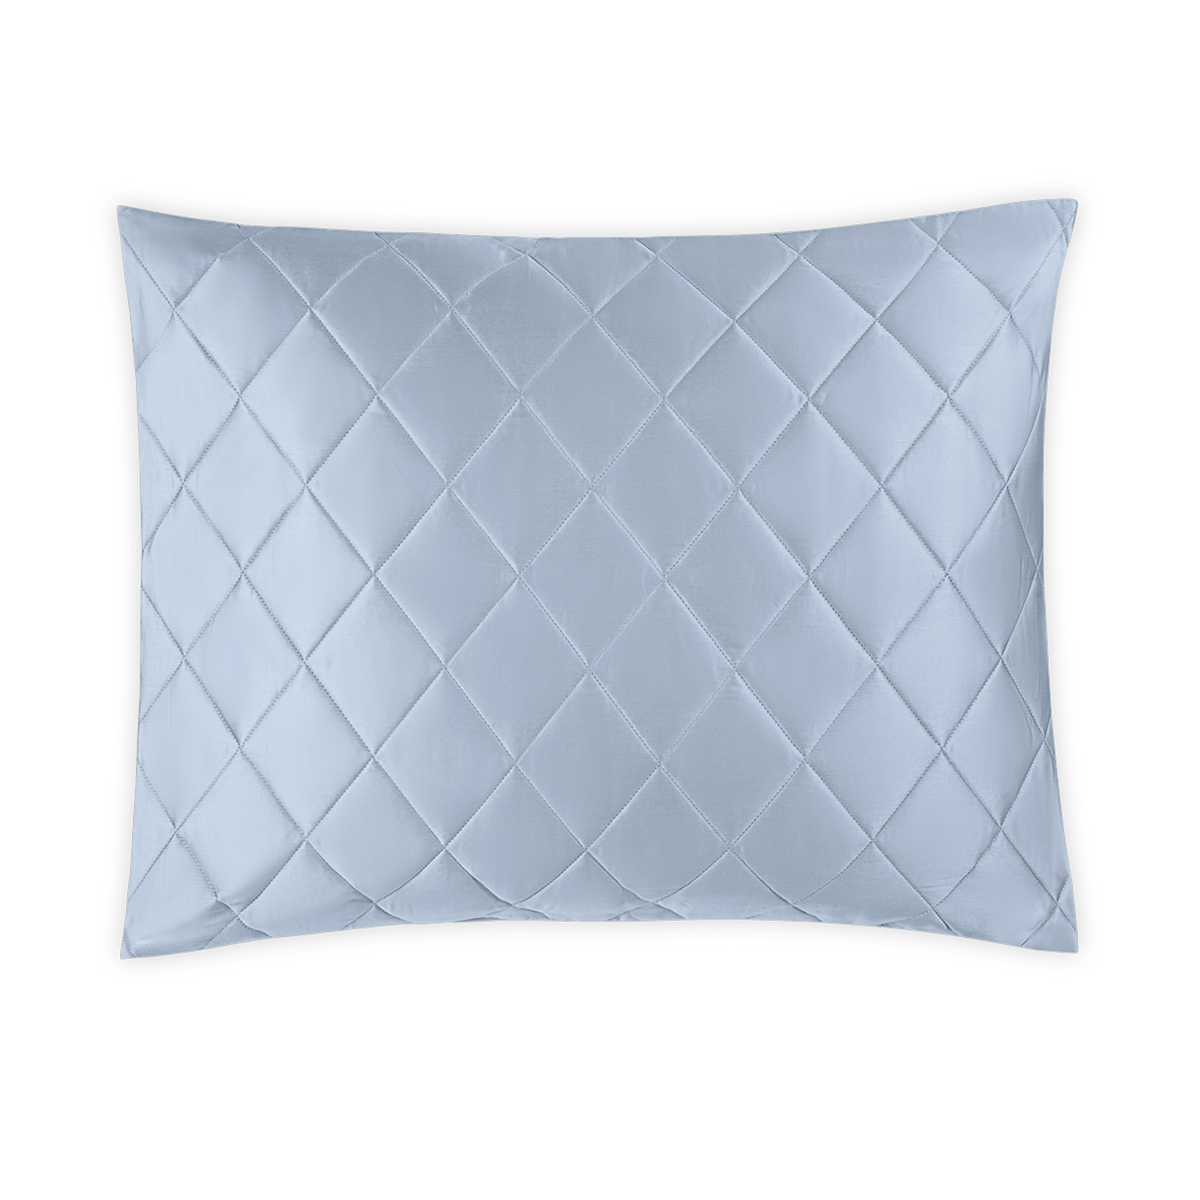 Silo Image of Matouk Nocturne Quilted Bedding Sham in Hazy Blue Color